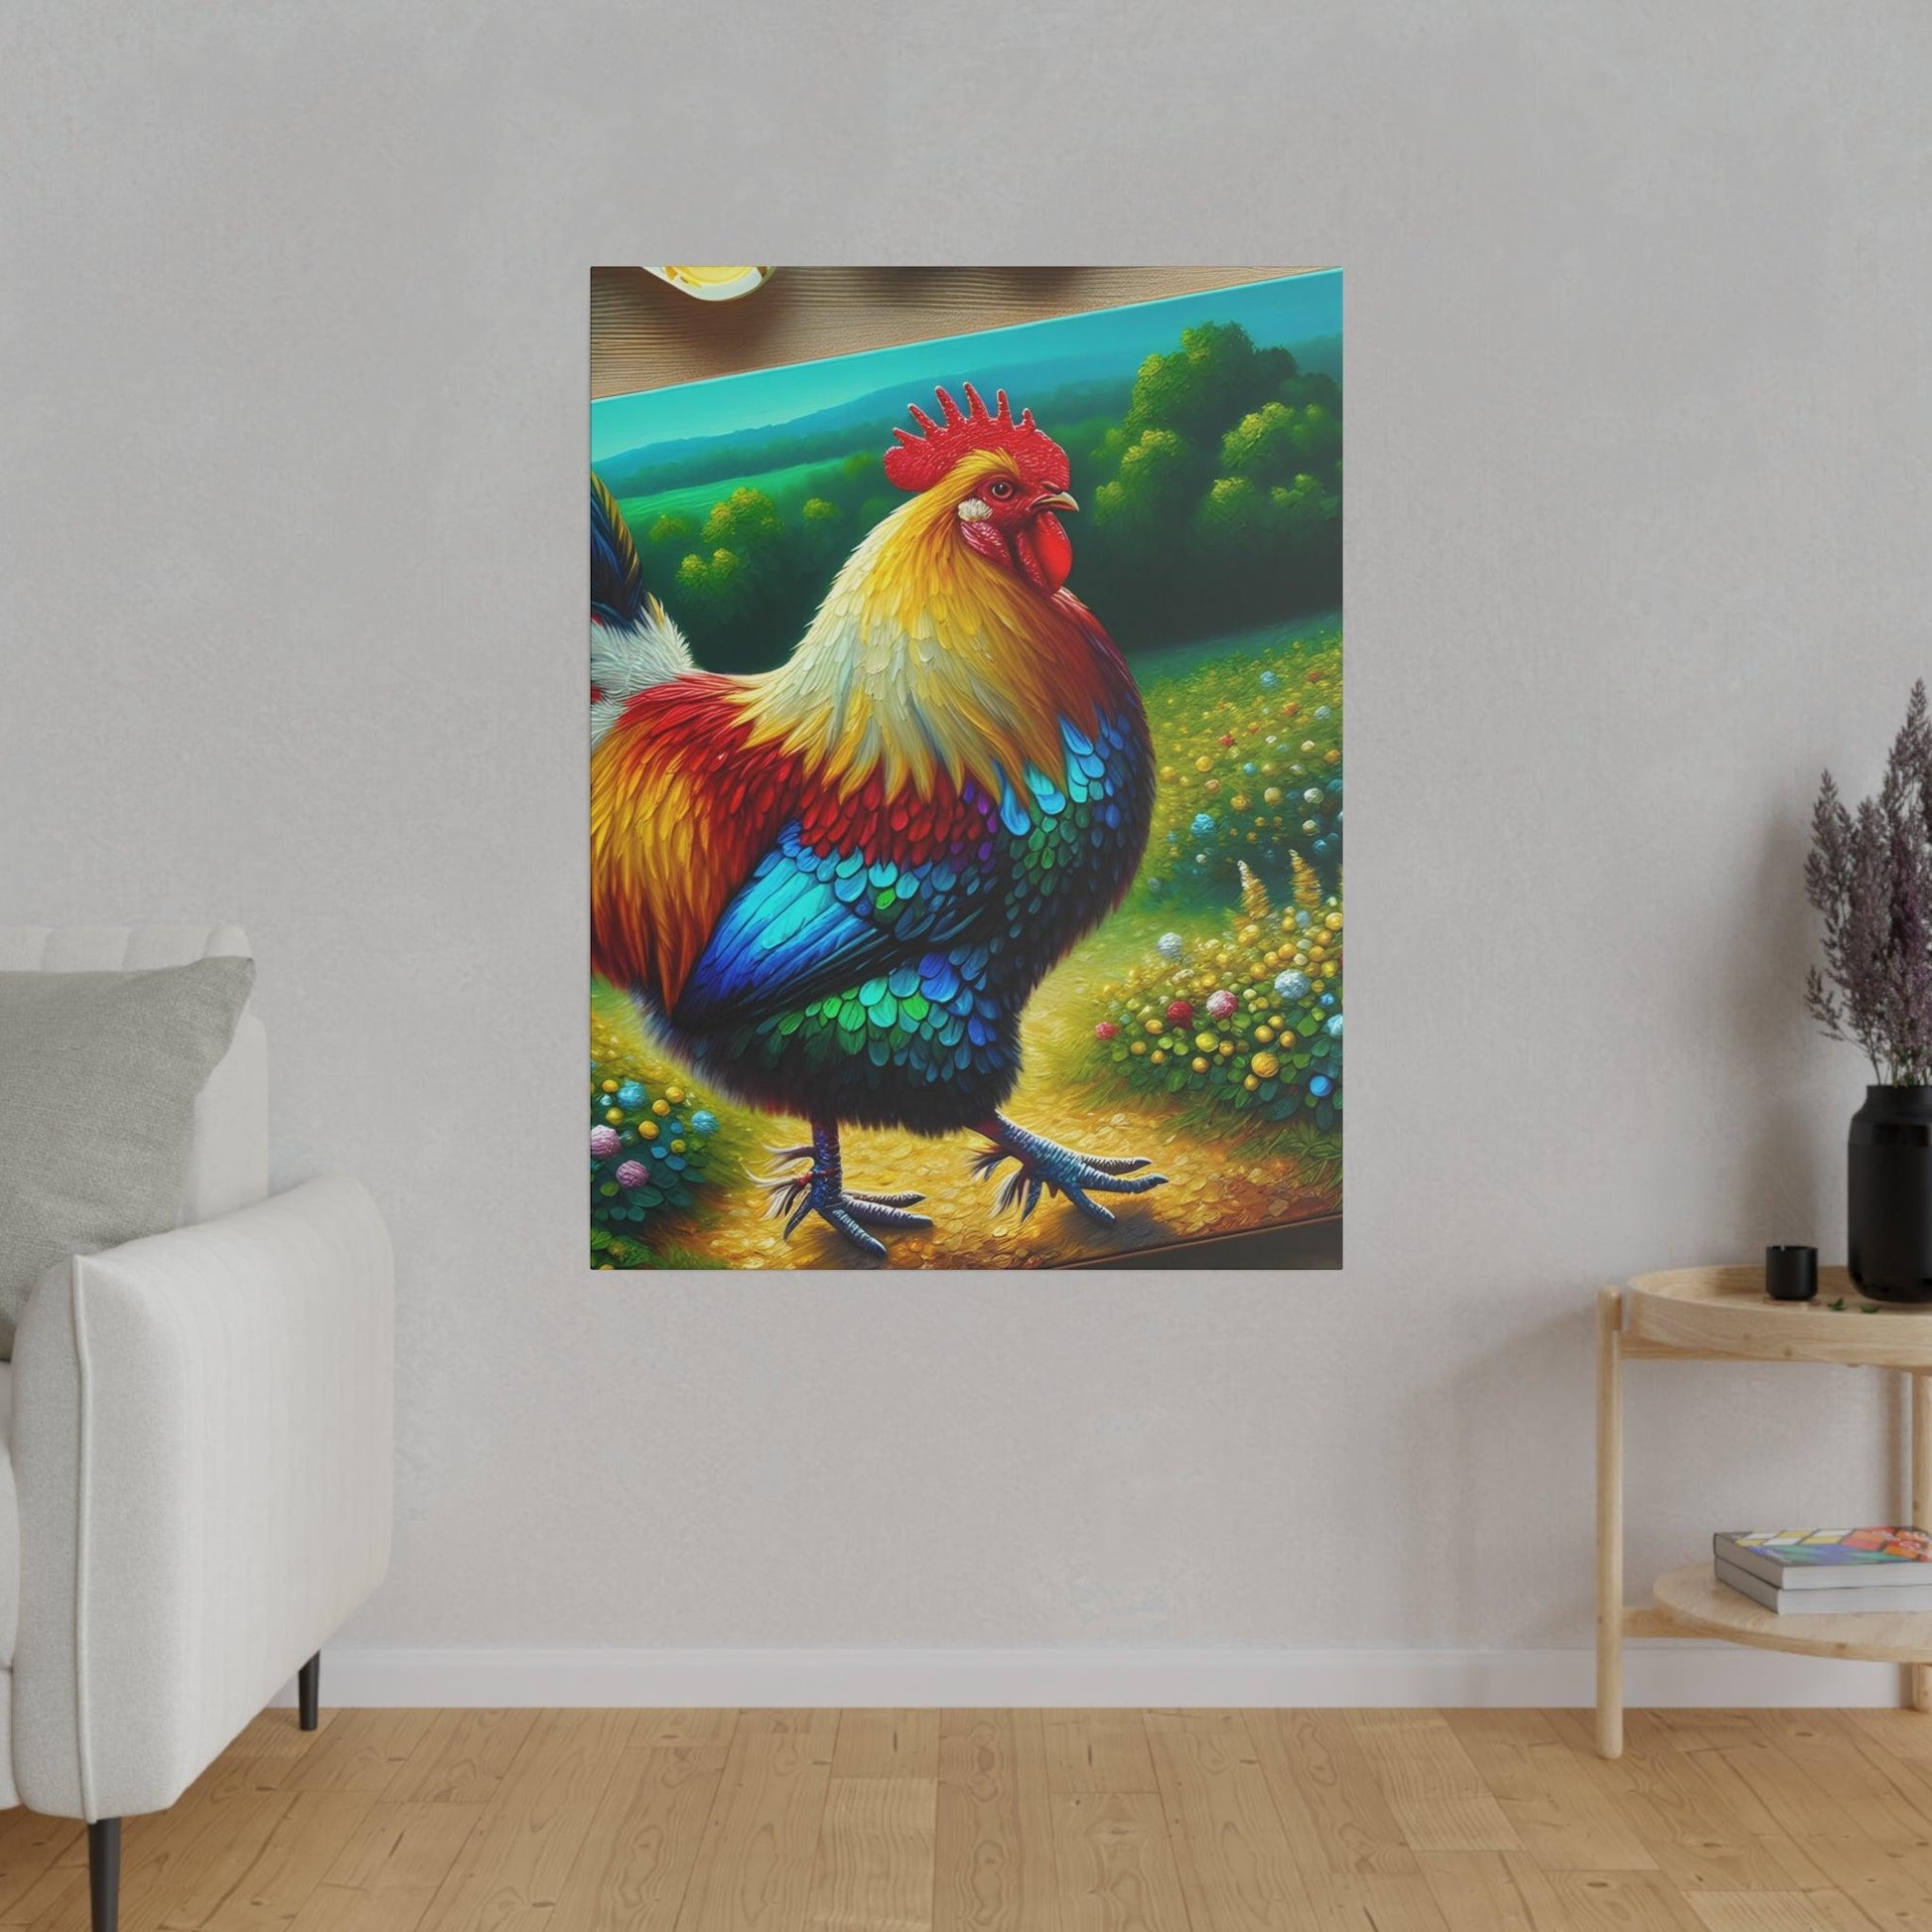 "Chic Chateau Chicken Canvas Wall Art" - The Alice Gallery